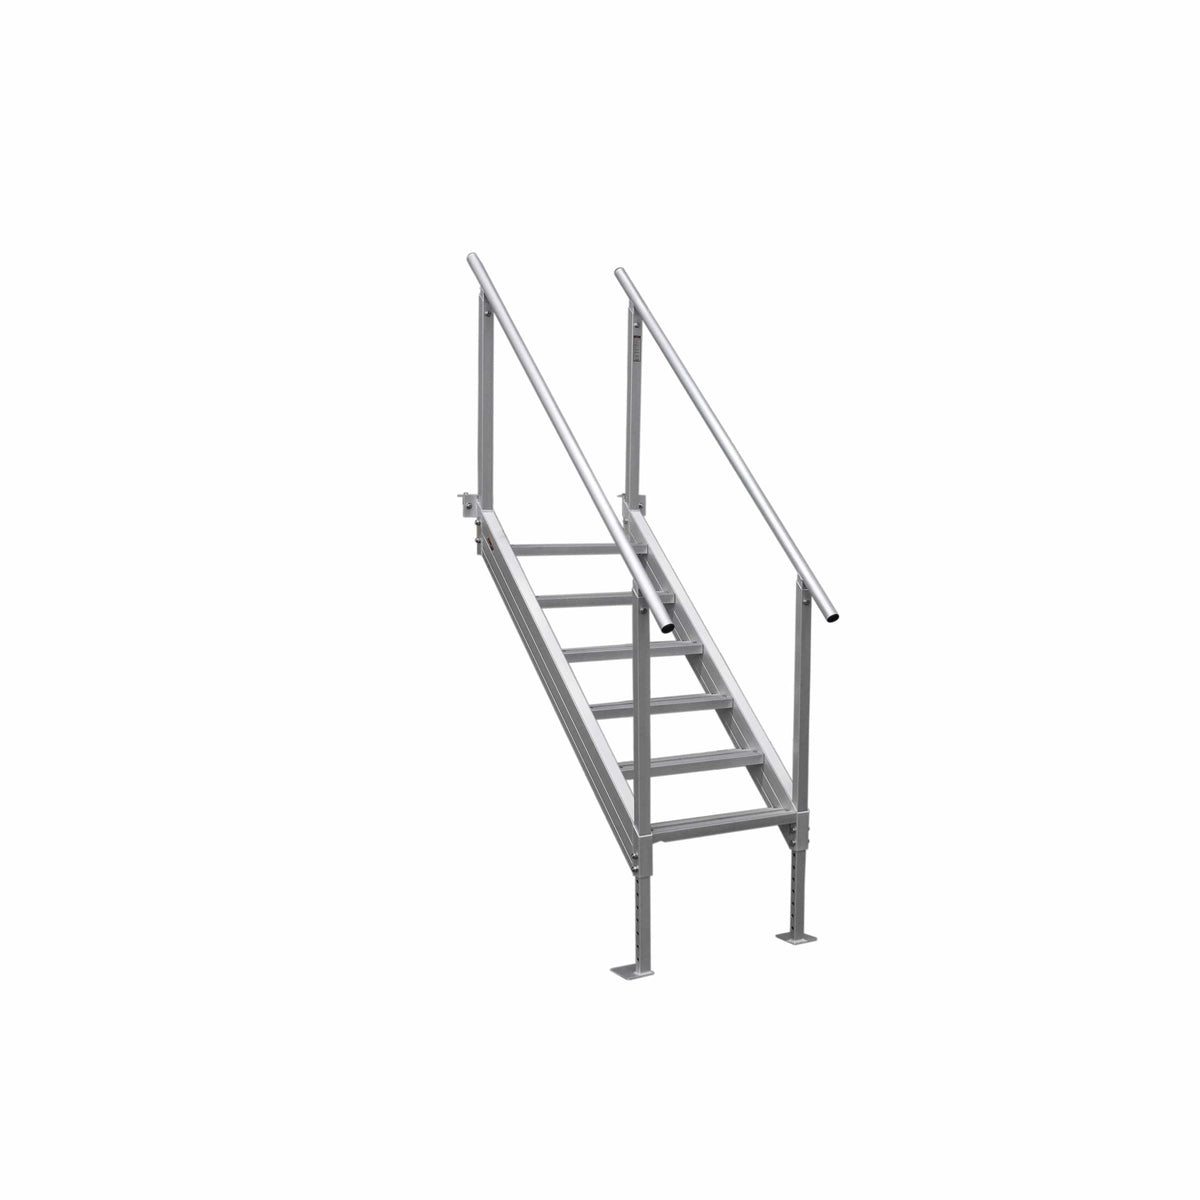 Extreme Max Not Qualified for Free Shipping Extreme Max Universal Mount Aluminum Dock Stair 6-Step #3005.3846